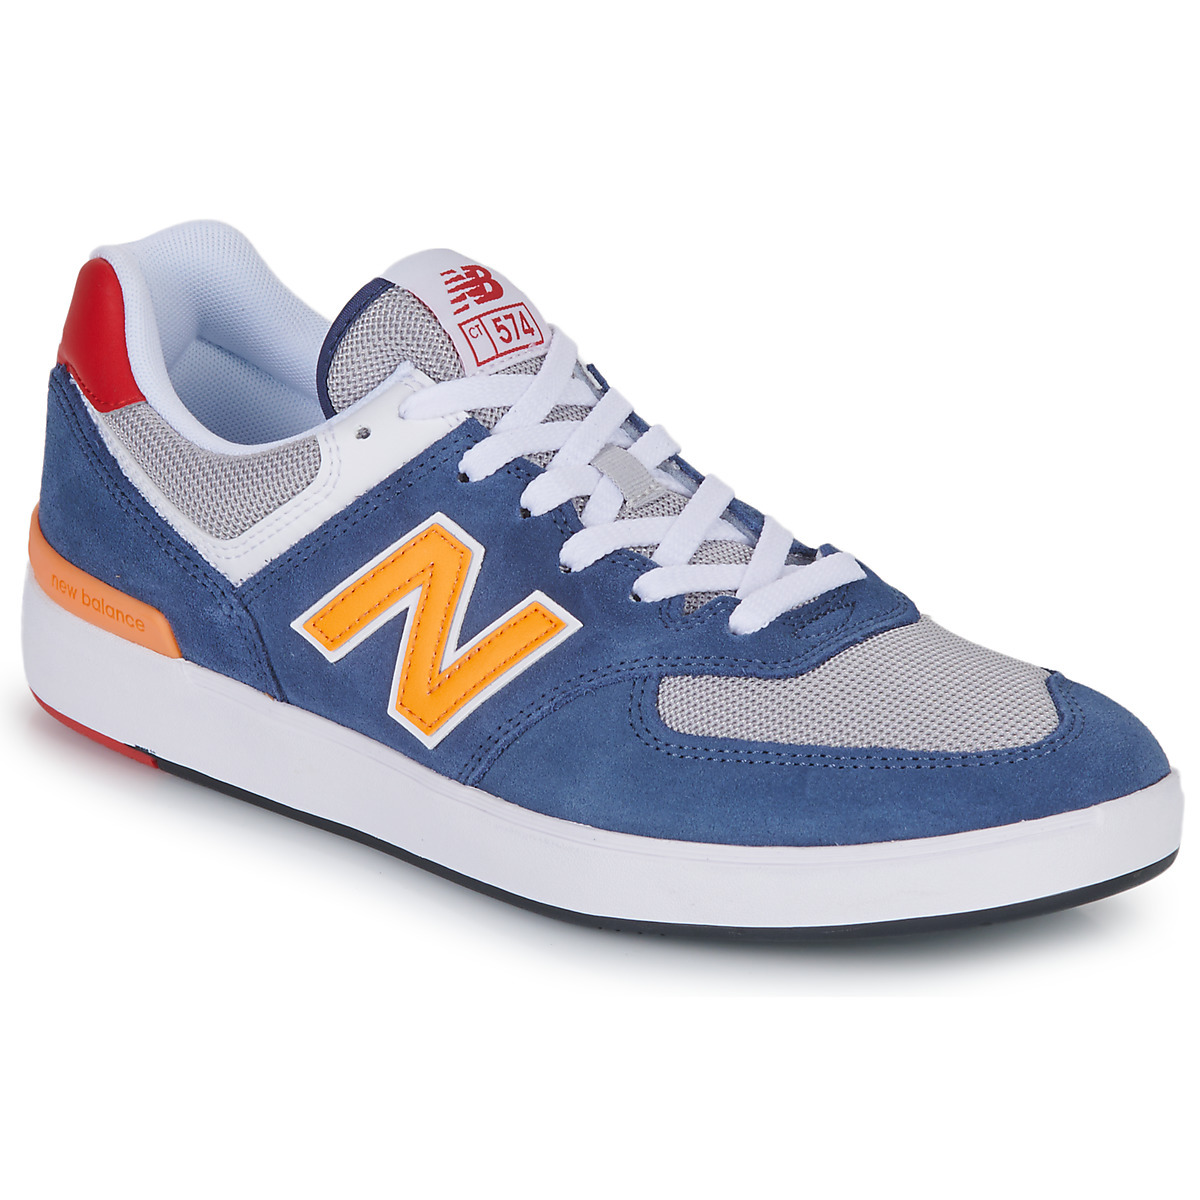 New Balance 574 Grey - Free delivery  Spartoo NET ! - Shoes Low top  trainers Women USD/$120.50